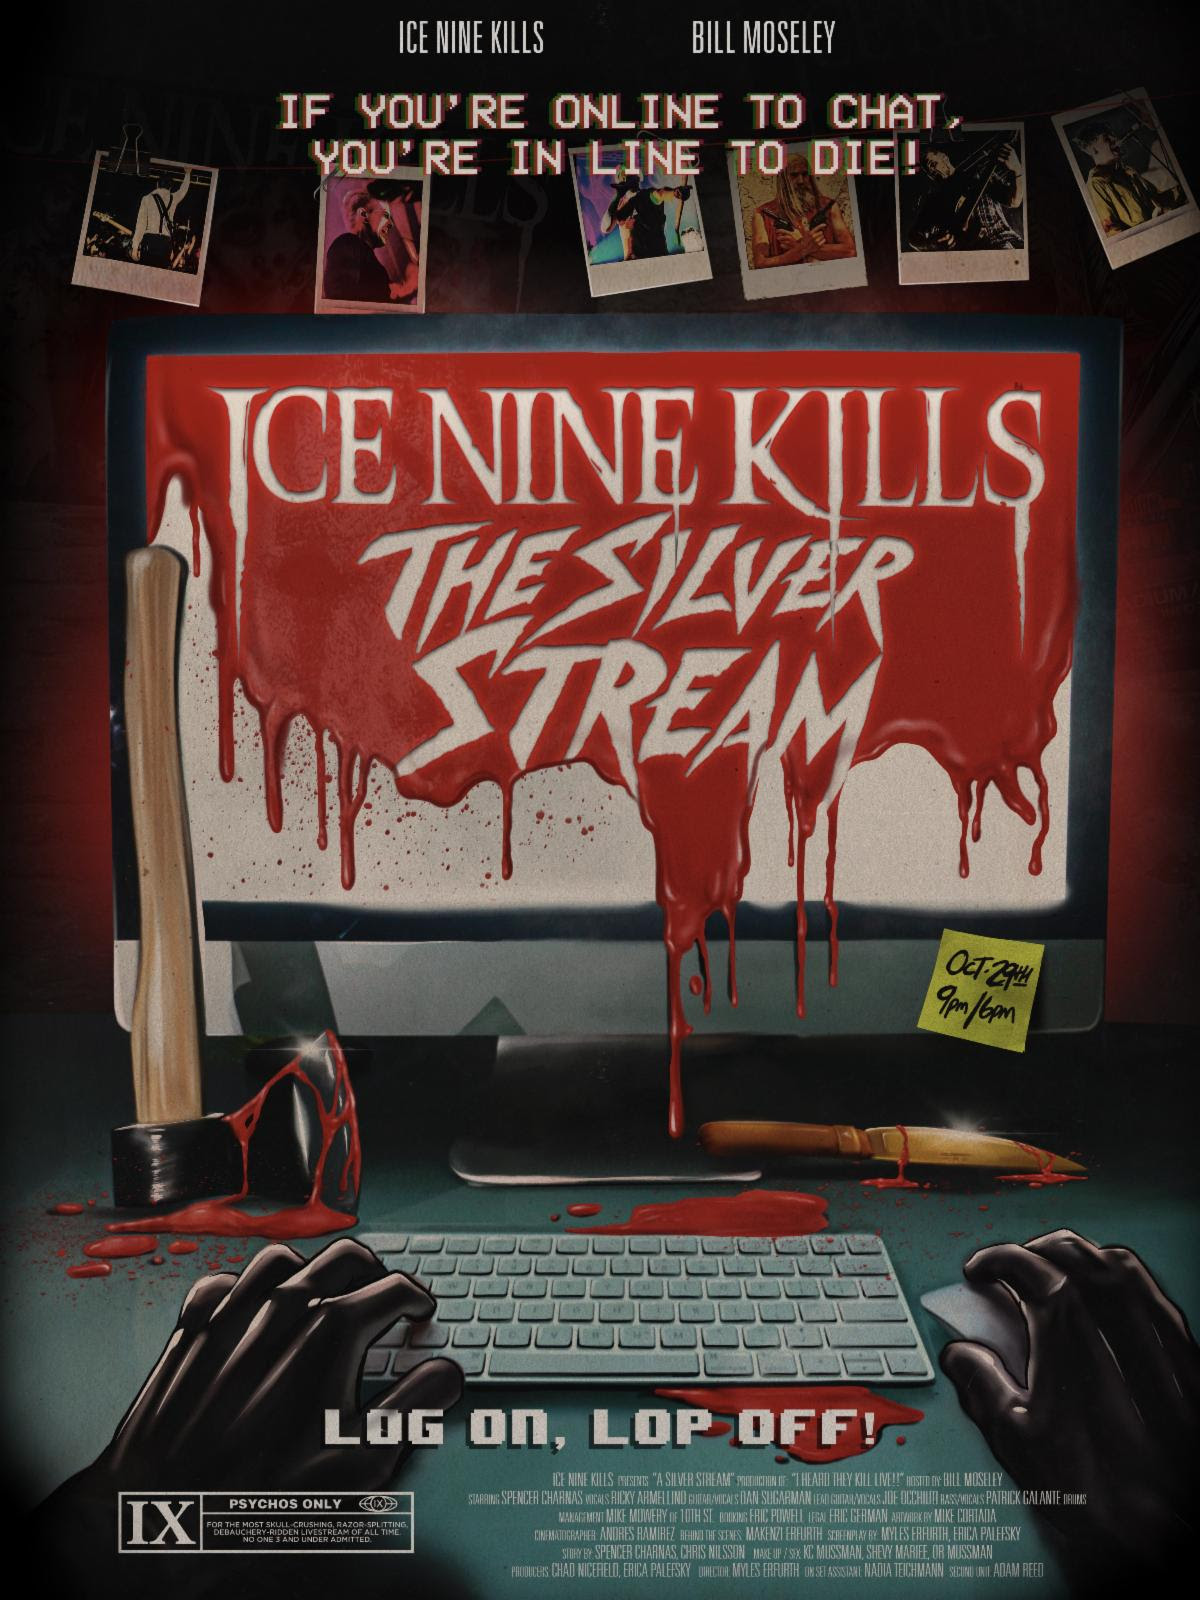 Ice Nine Kills Reveal Cinematic Trailer For Streaming Event